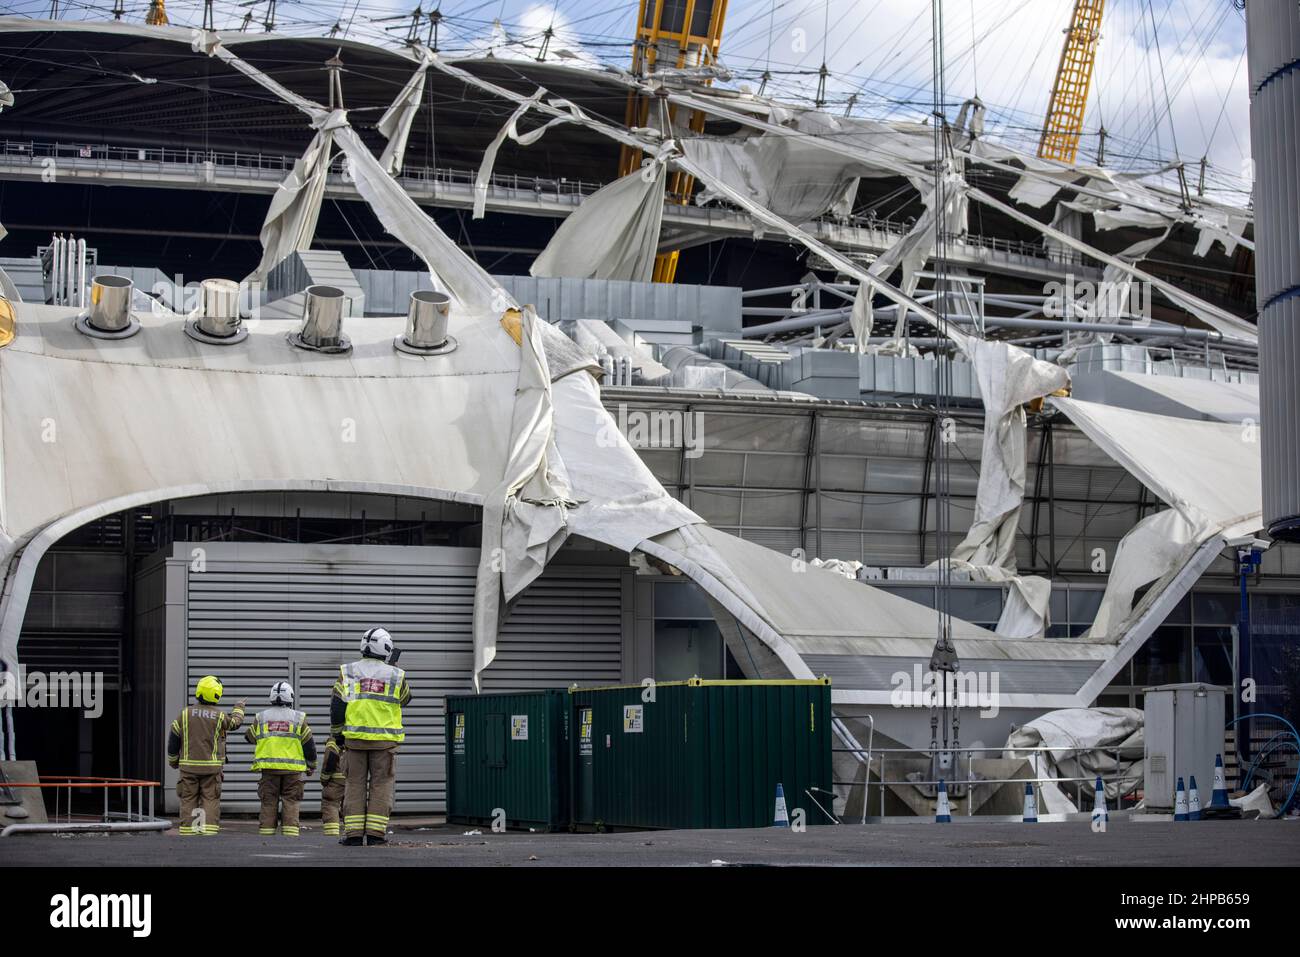 Fireman attend the scene at O2 Arena in East London where the tarpaulin was ripped due to high winds caused by Storm Eunice on Friday 18th Feb 2022 Stock Photo